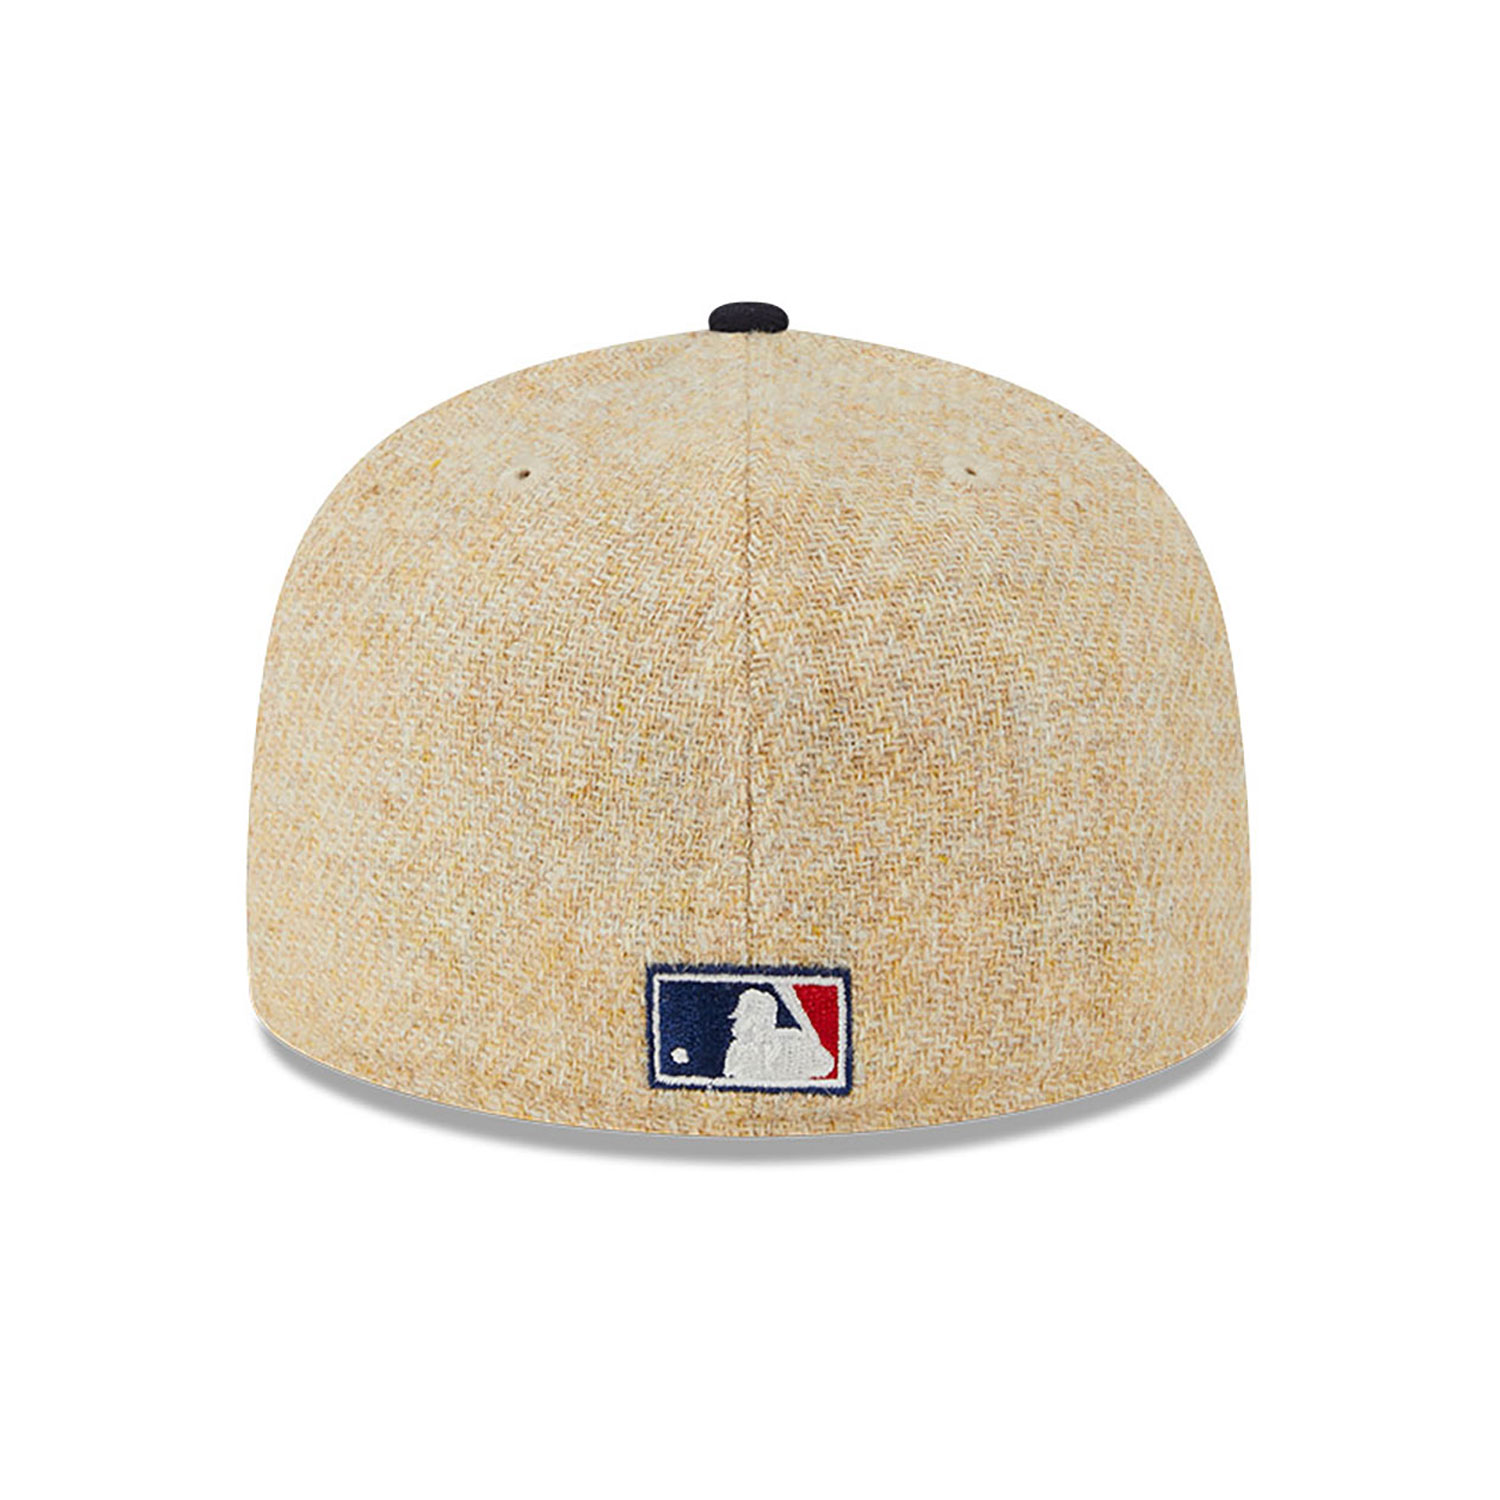 Chicago White Sox Harris Tweed Beige 59FIFTY Fitted Cap